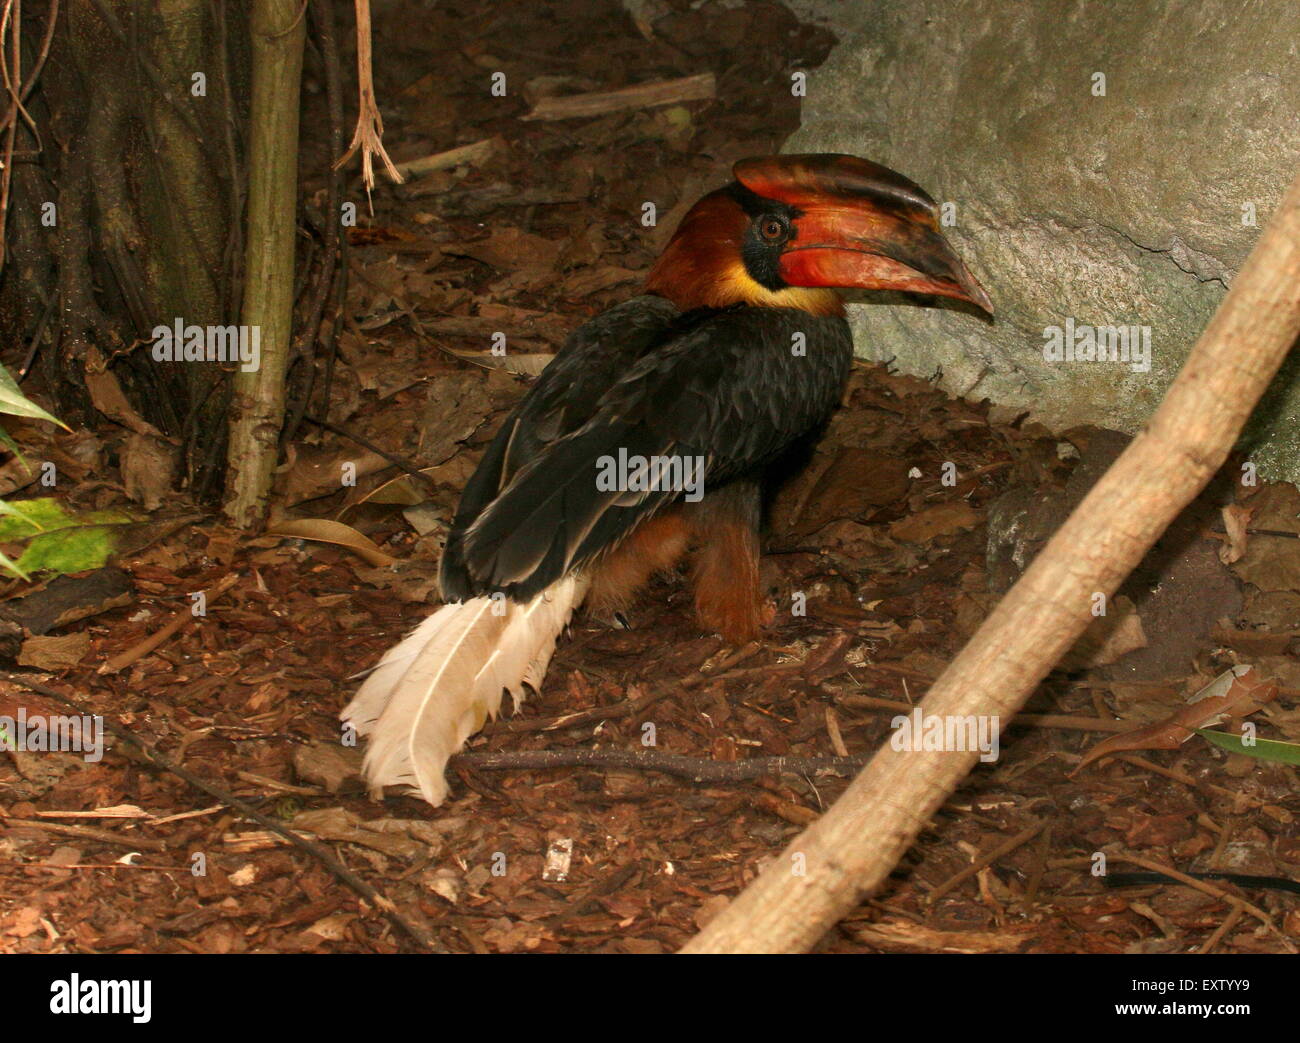 Male Asian Rufous hornbill (Buceros hydrocorax), also known as Philippine hornbill foraging on the forest floor Stock Photo